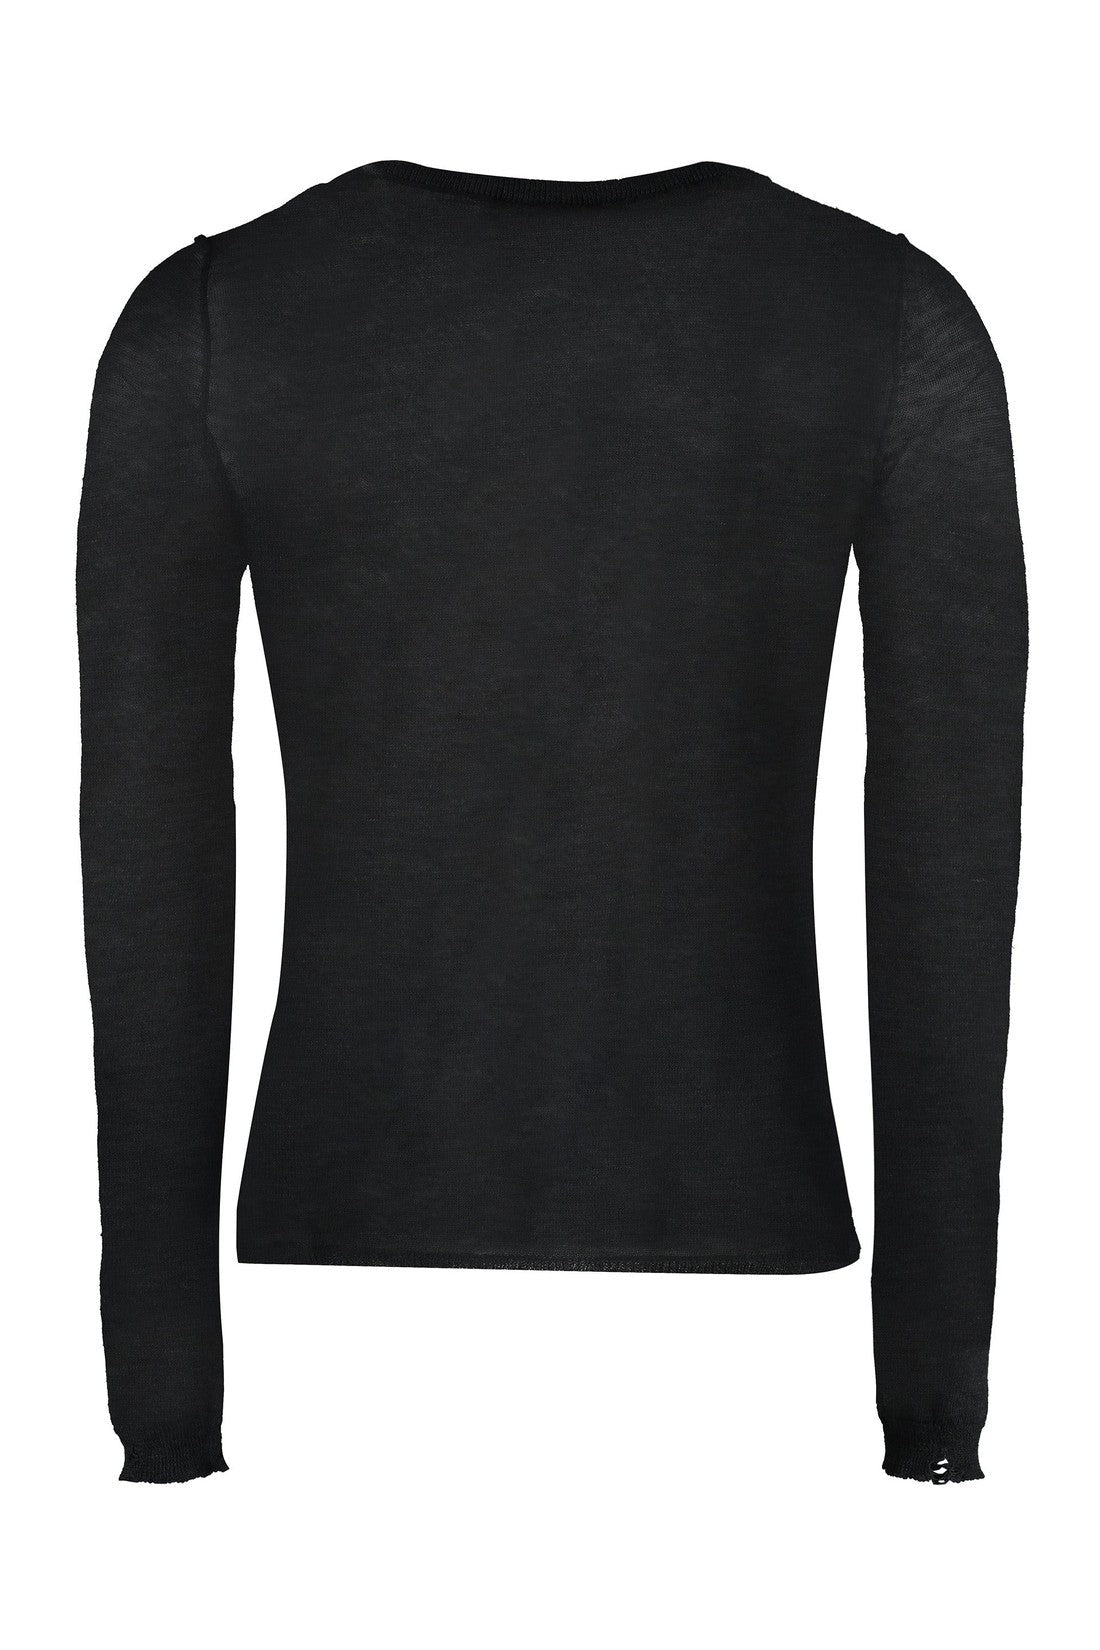 Dolce & Gabbana-OUTLET-SALE-Long sleeve crew-neck sweater-ARCHIVIST